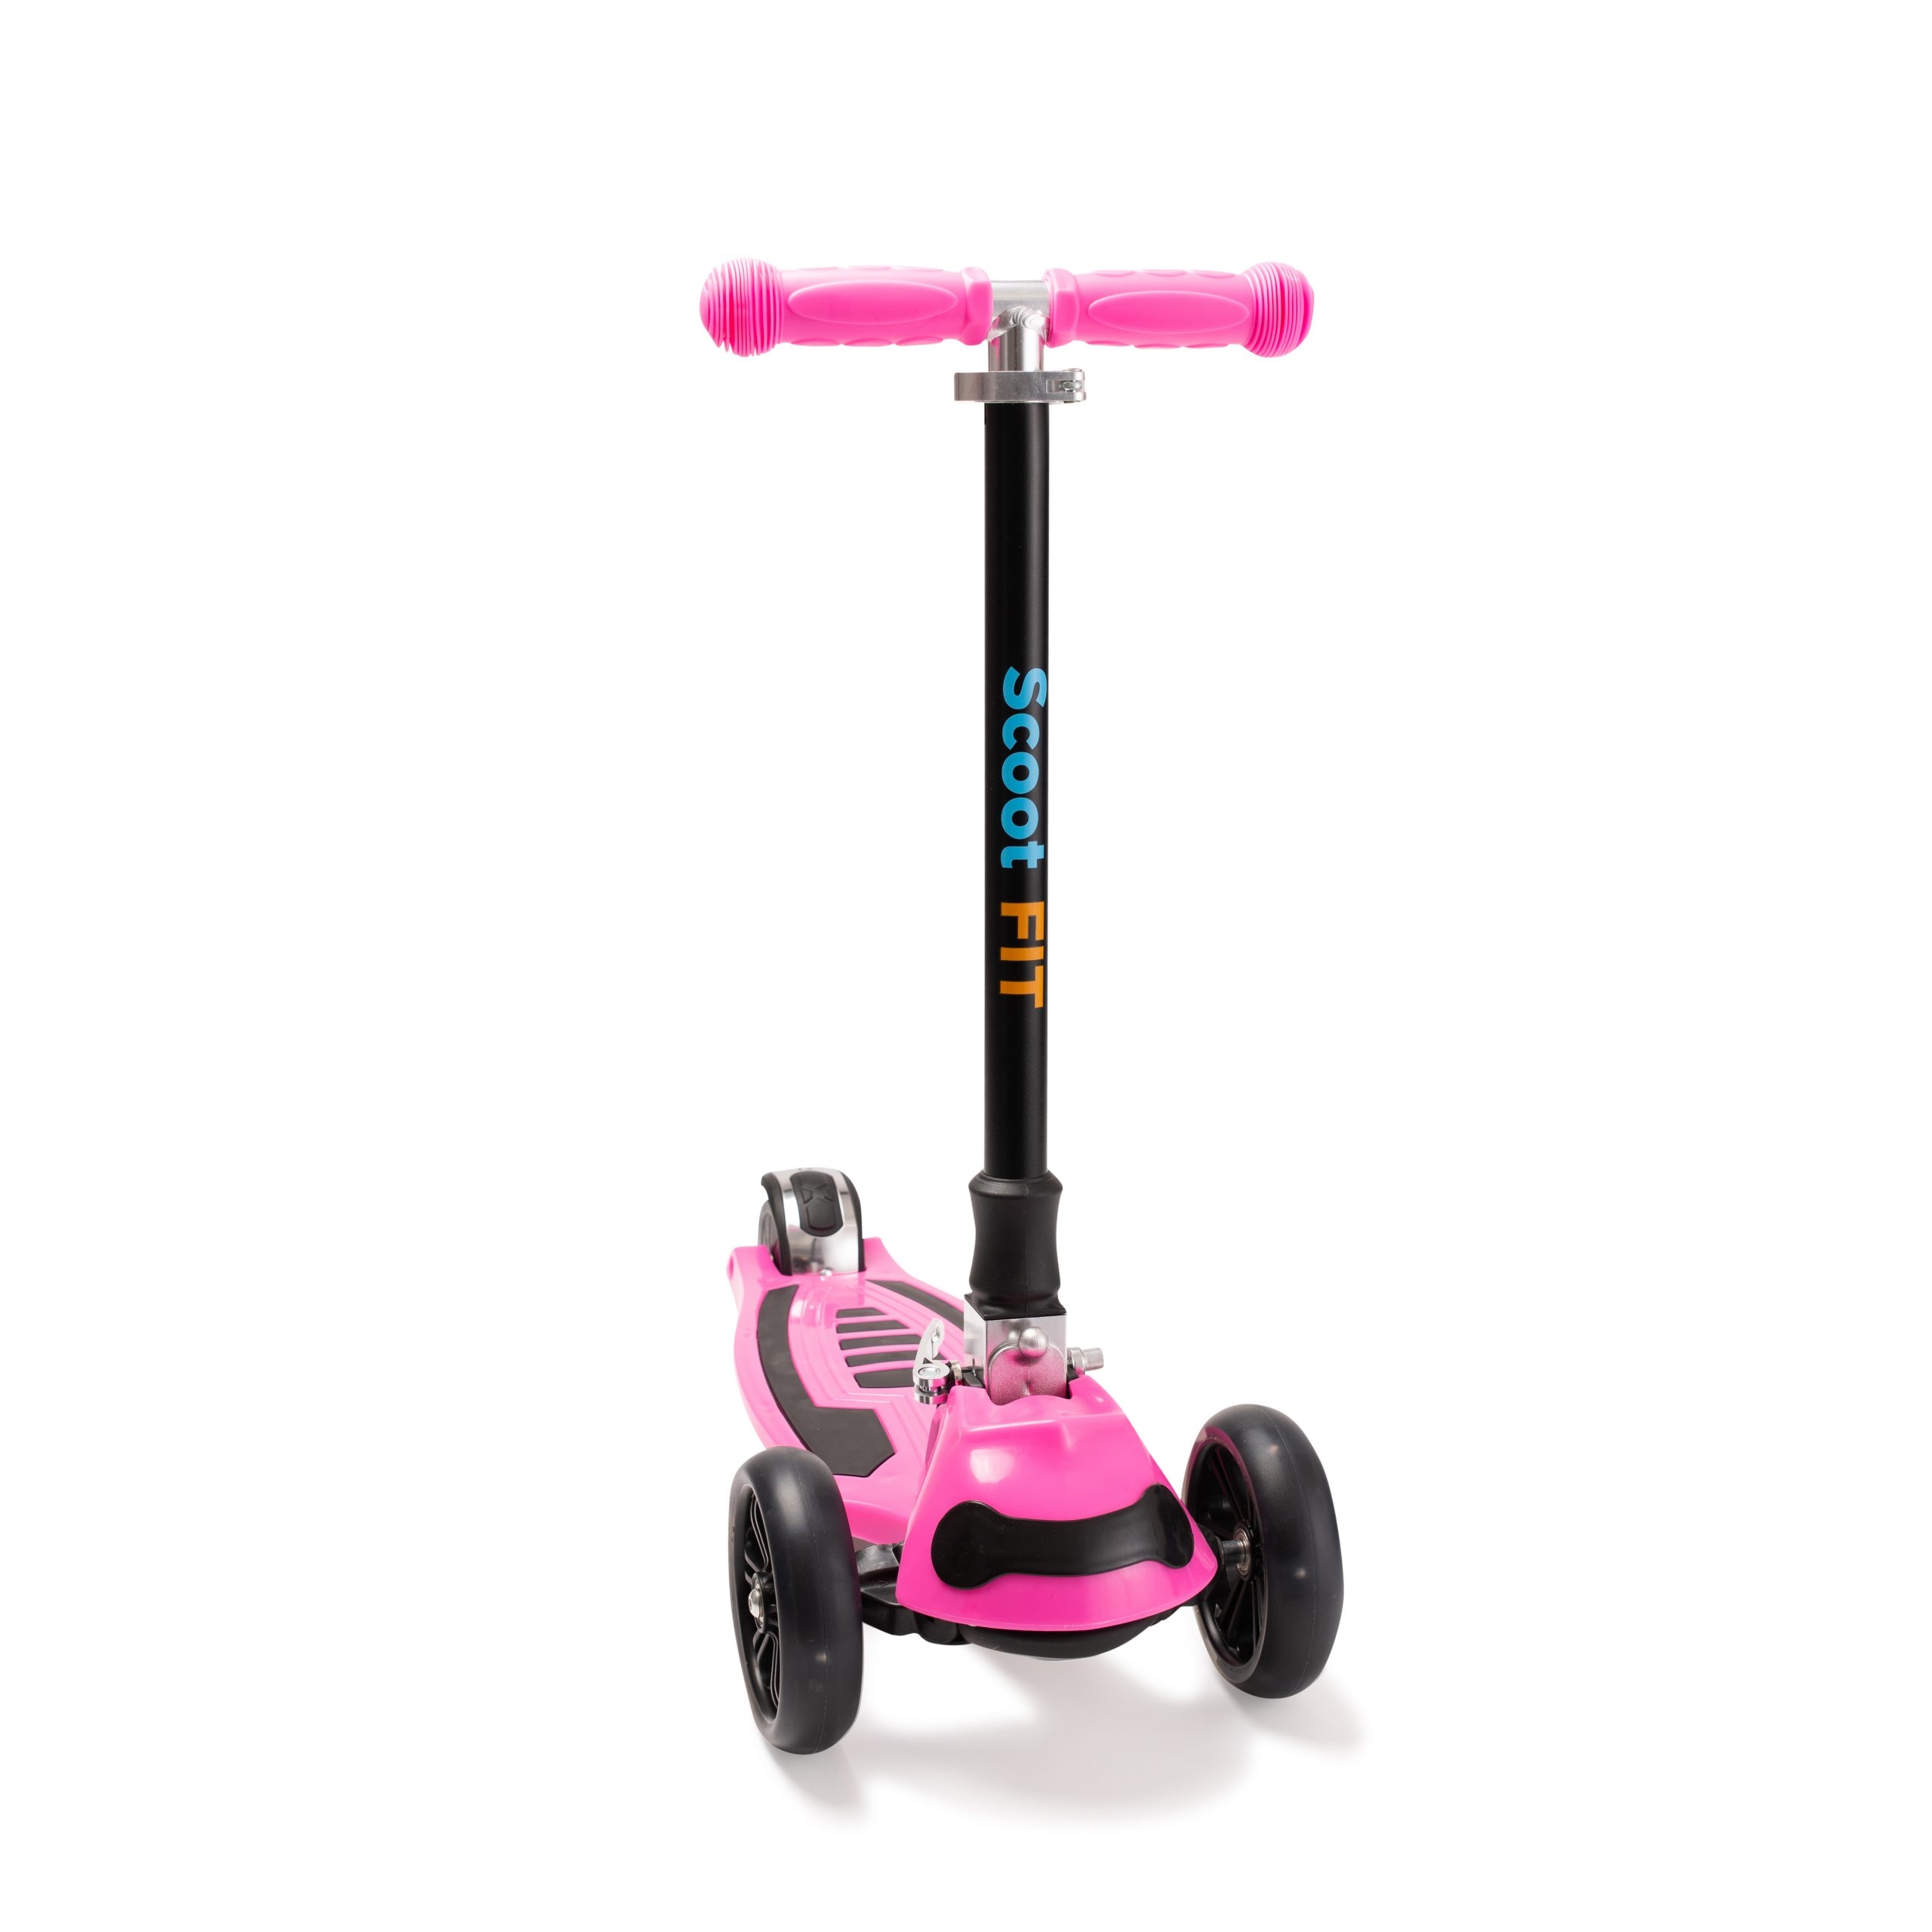 The Big One Kids 3 Wheel Scooter – Pink – Adjustable Size Children’s Scooter – Scoot Fit